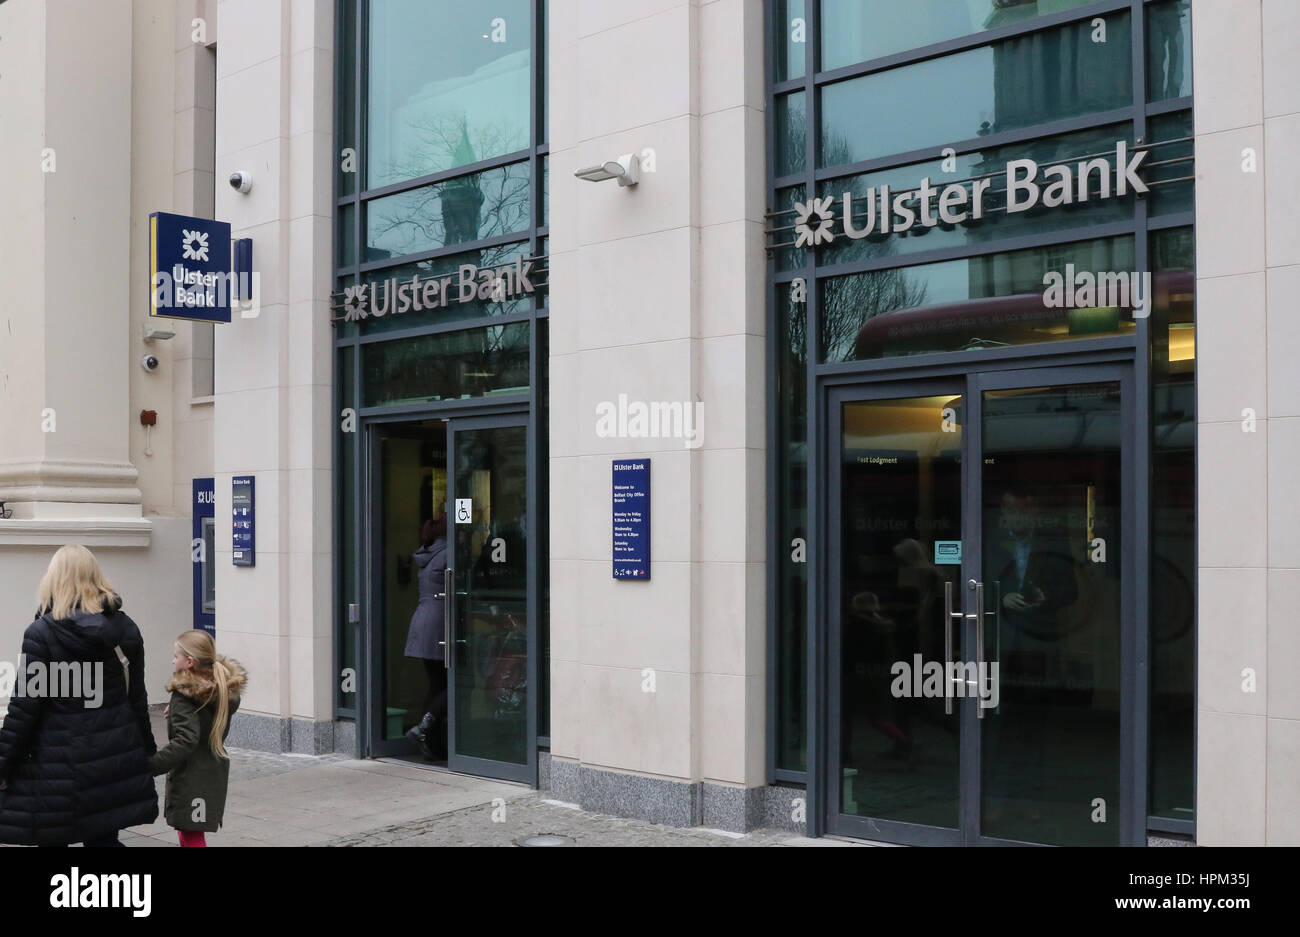 The Belfast City Office Branch of the Ulster Bank in Donegall Square East, Belfast, Northern Ireland. Ulster Bank is a subsidiary of RBS (Royal Bank o Stock Photo